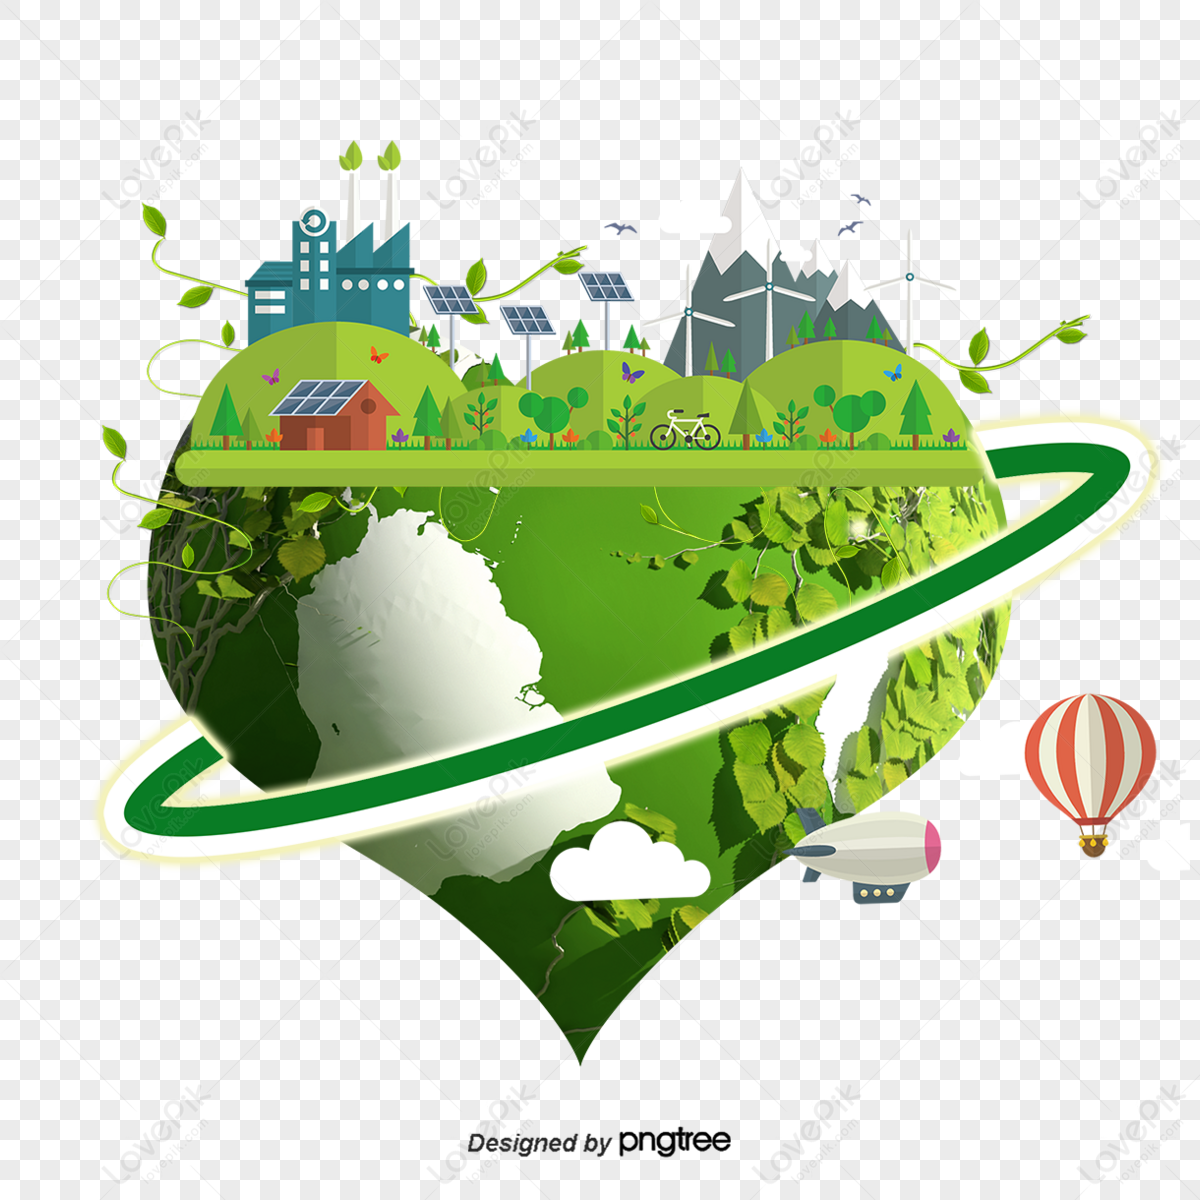 Green Planet PNG Transparent Images Free Download | Vector Files | Pngtree